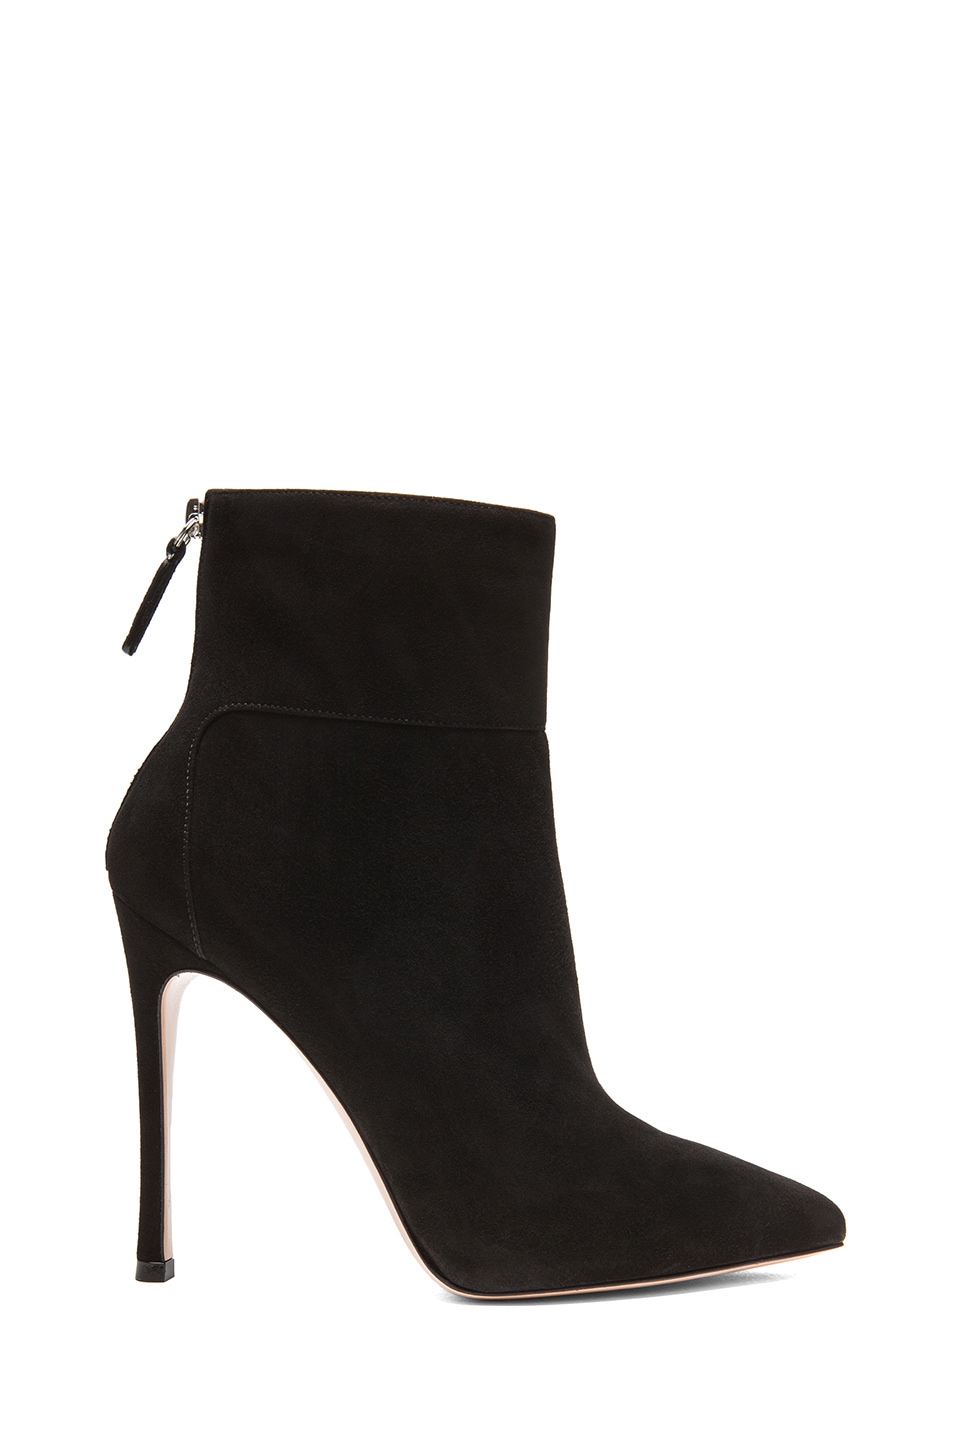 Image 1 of Gianvito Rossi Suede Ankle Booties in Black